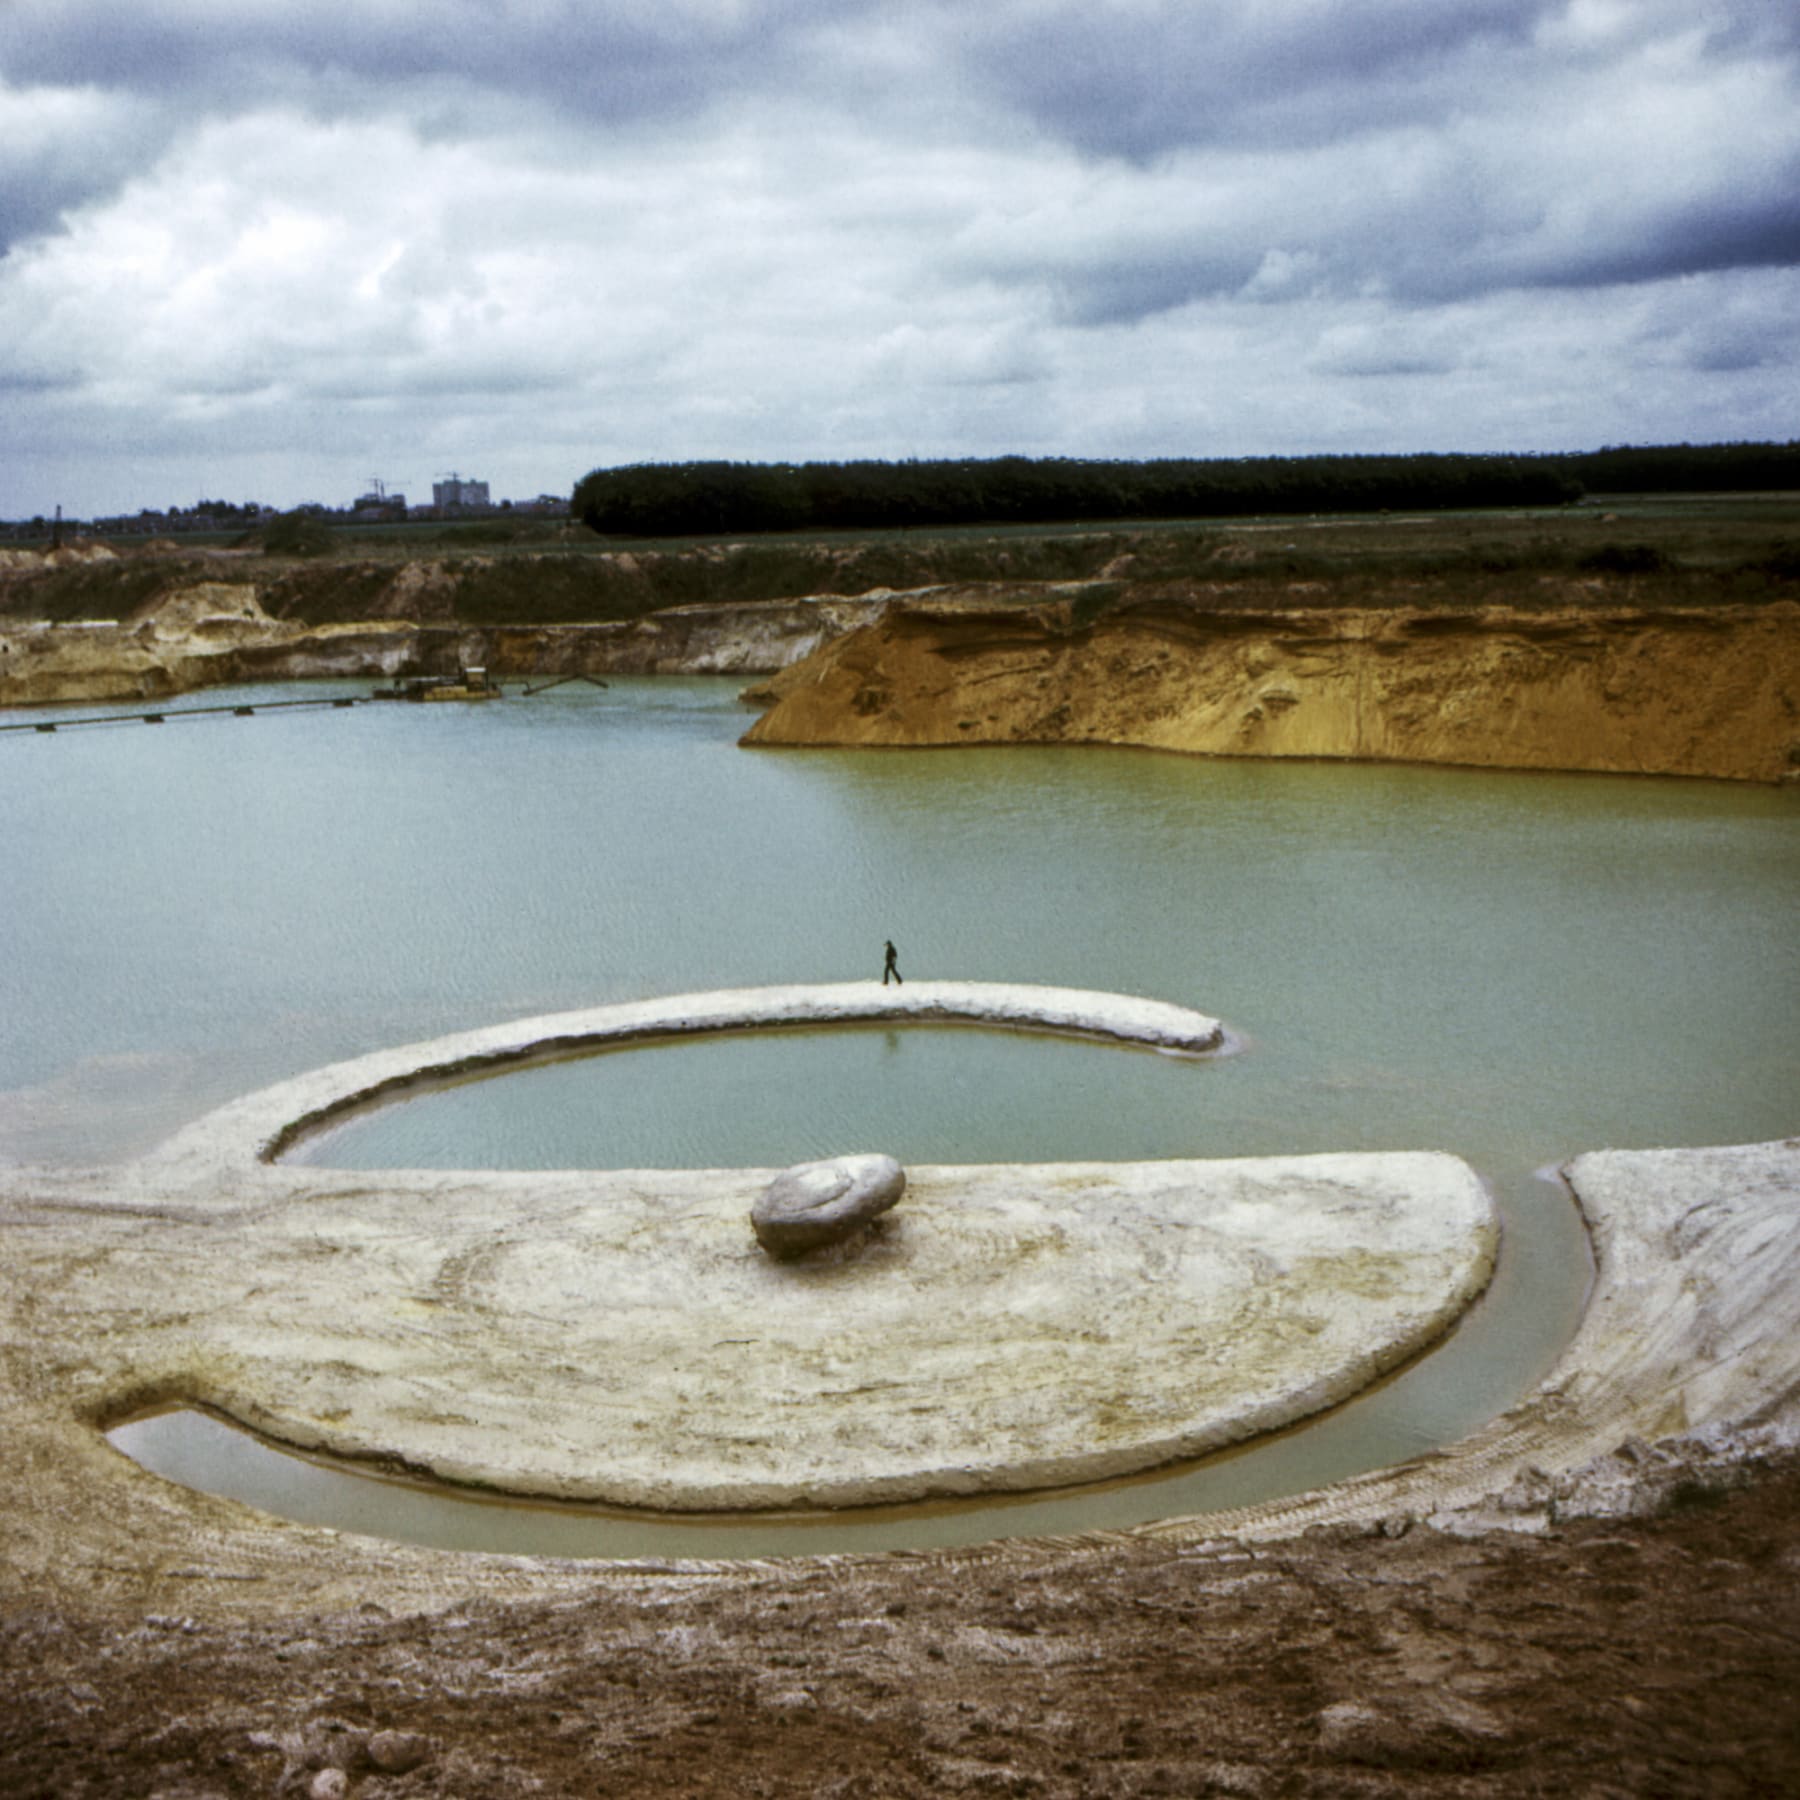 Robert Smithon's land art, Broken Circle, in a quarry in the Netherlands